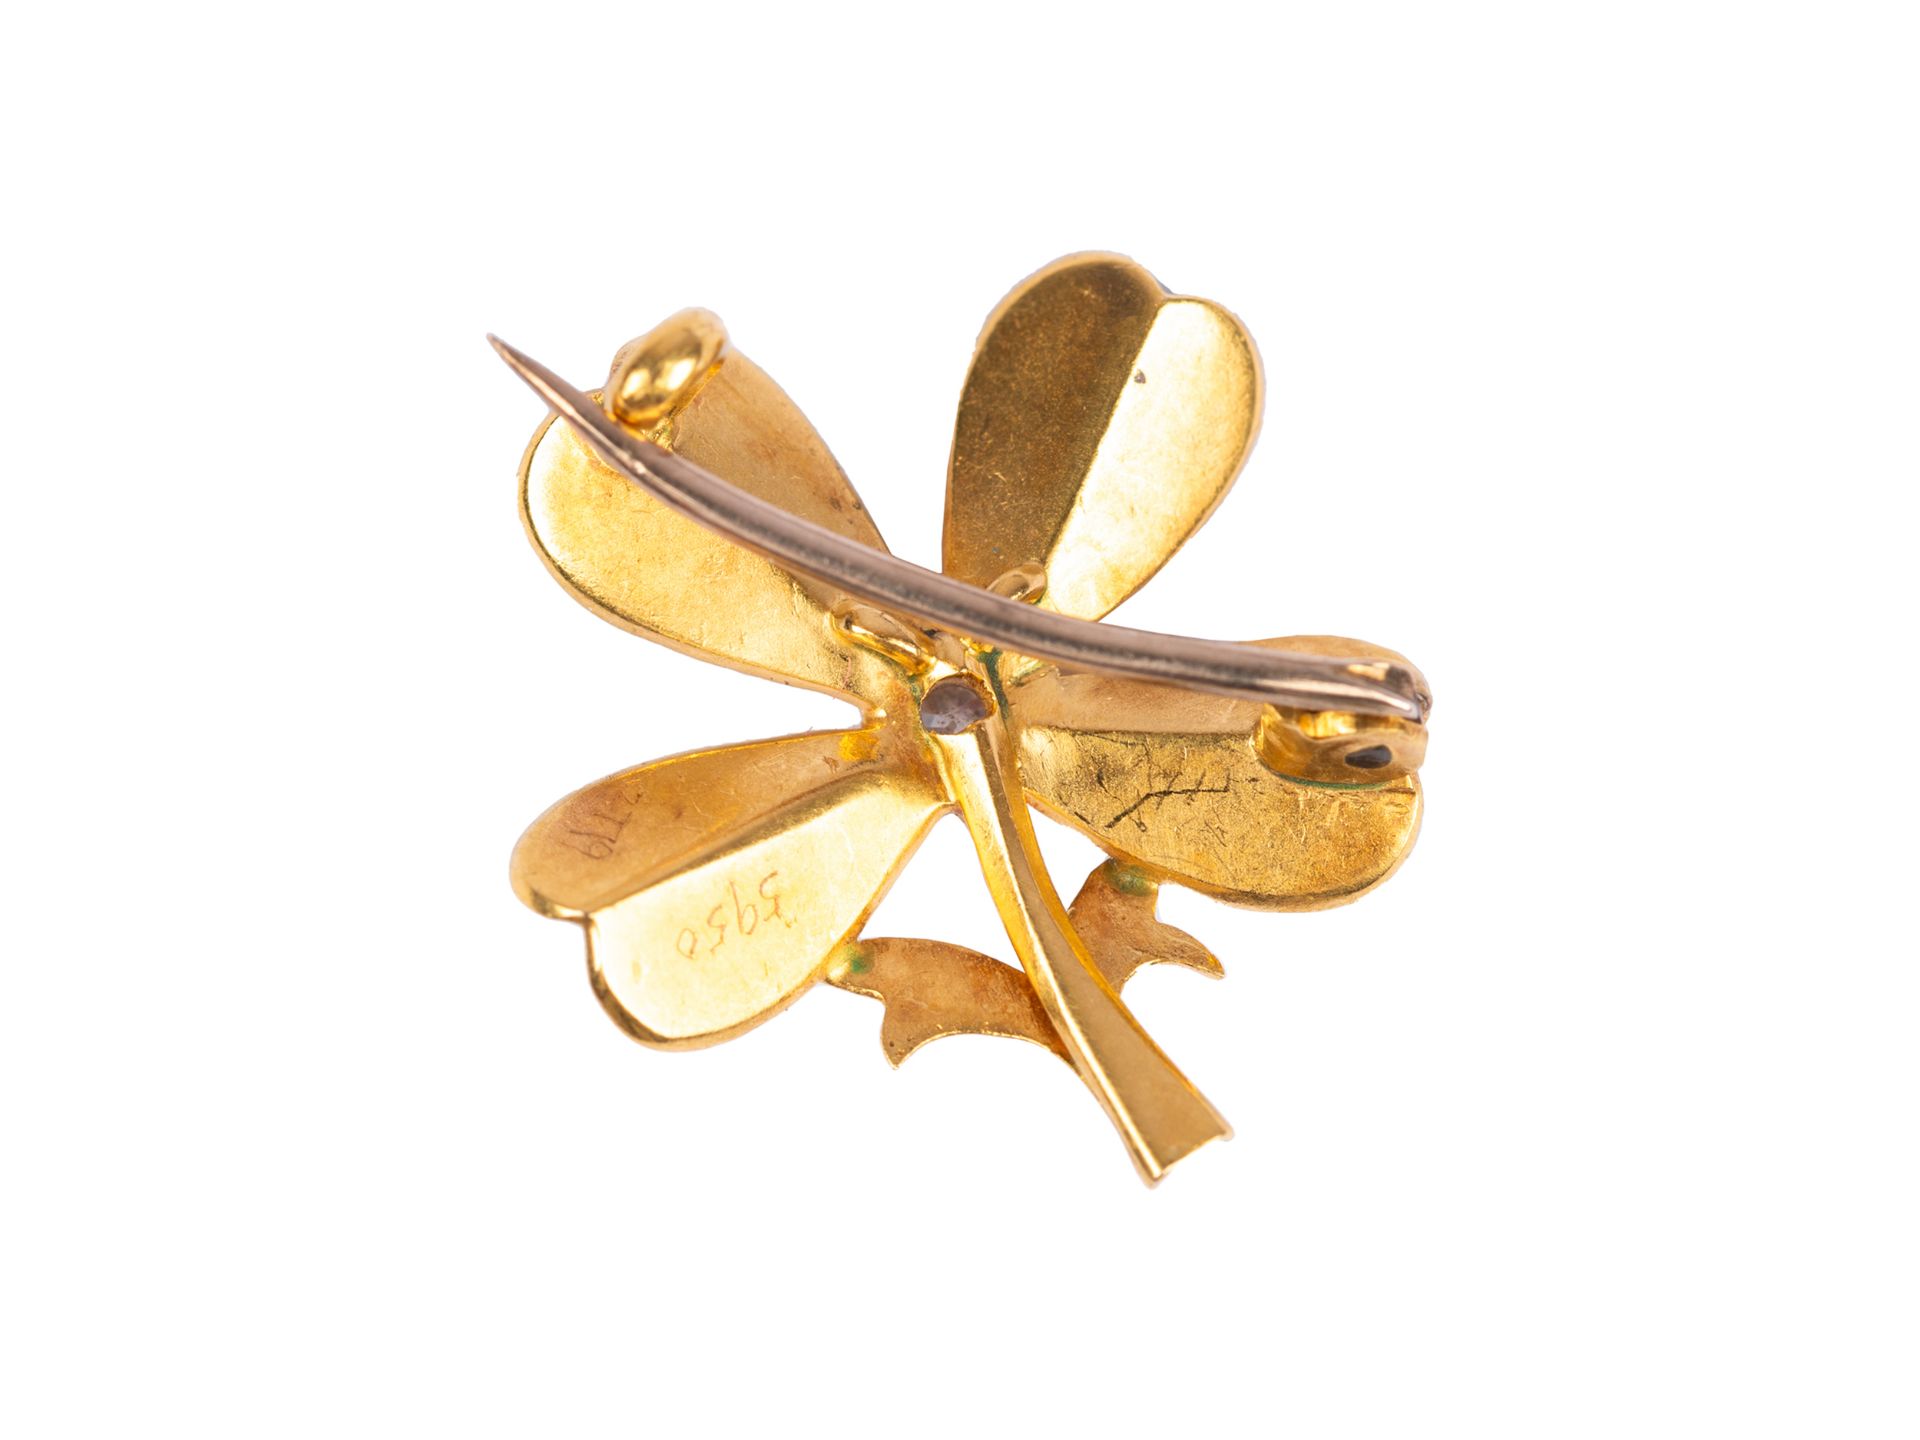 Brooch in the shape of a four-leaf clover, Around 1900, 15kt yellow gold - Image 2 of 2